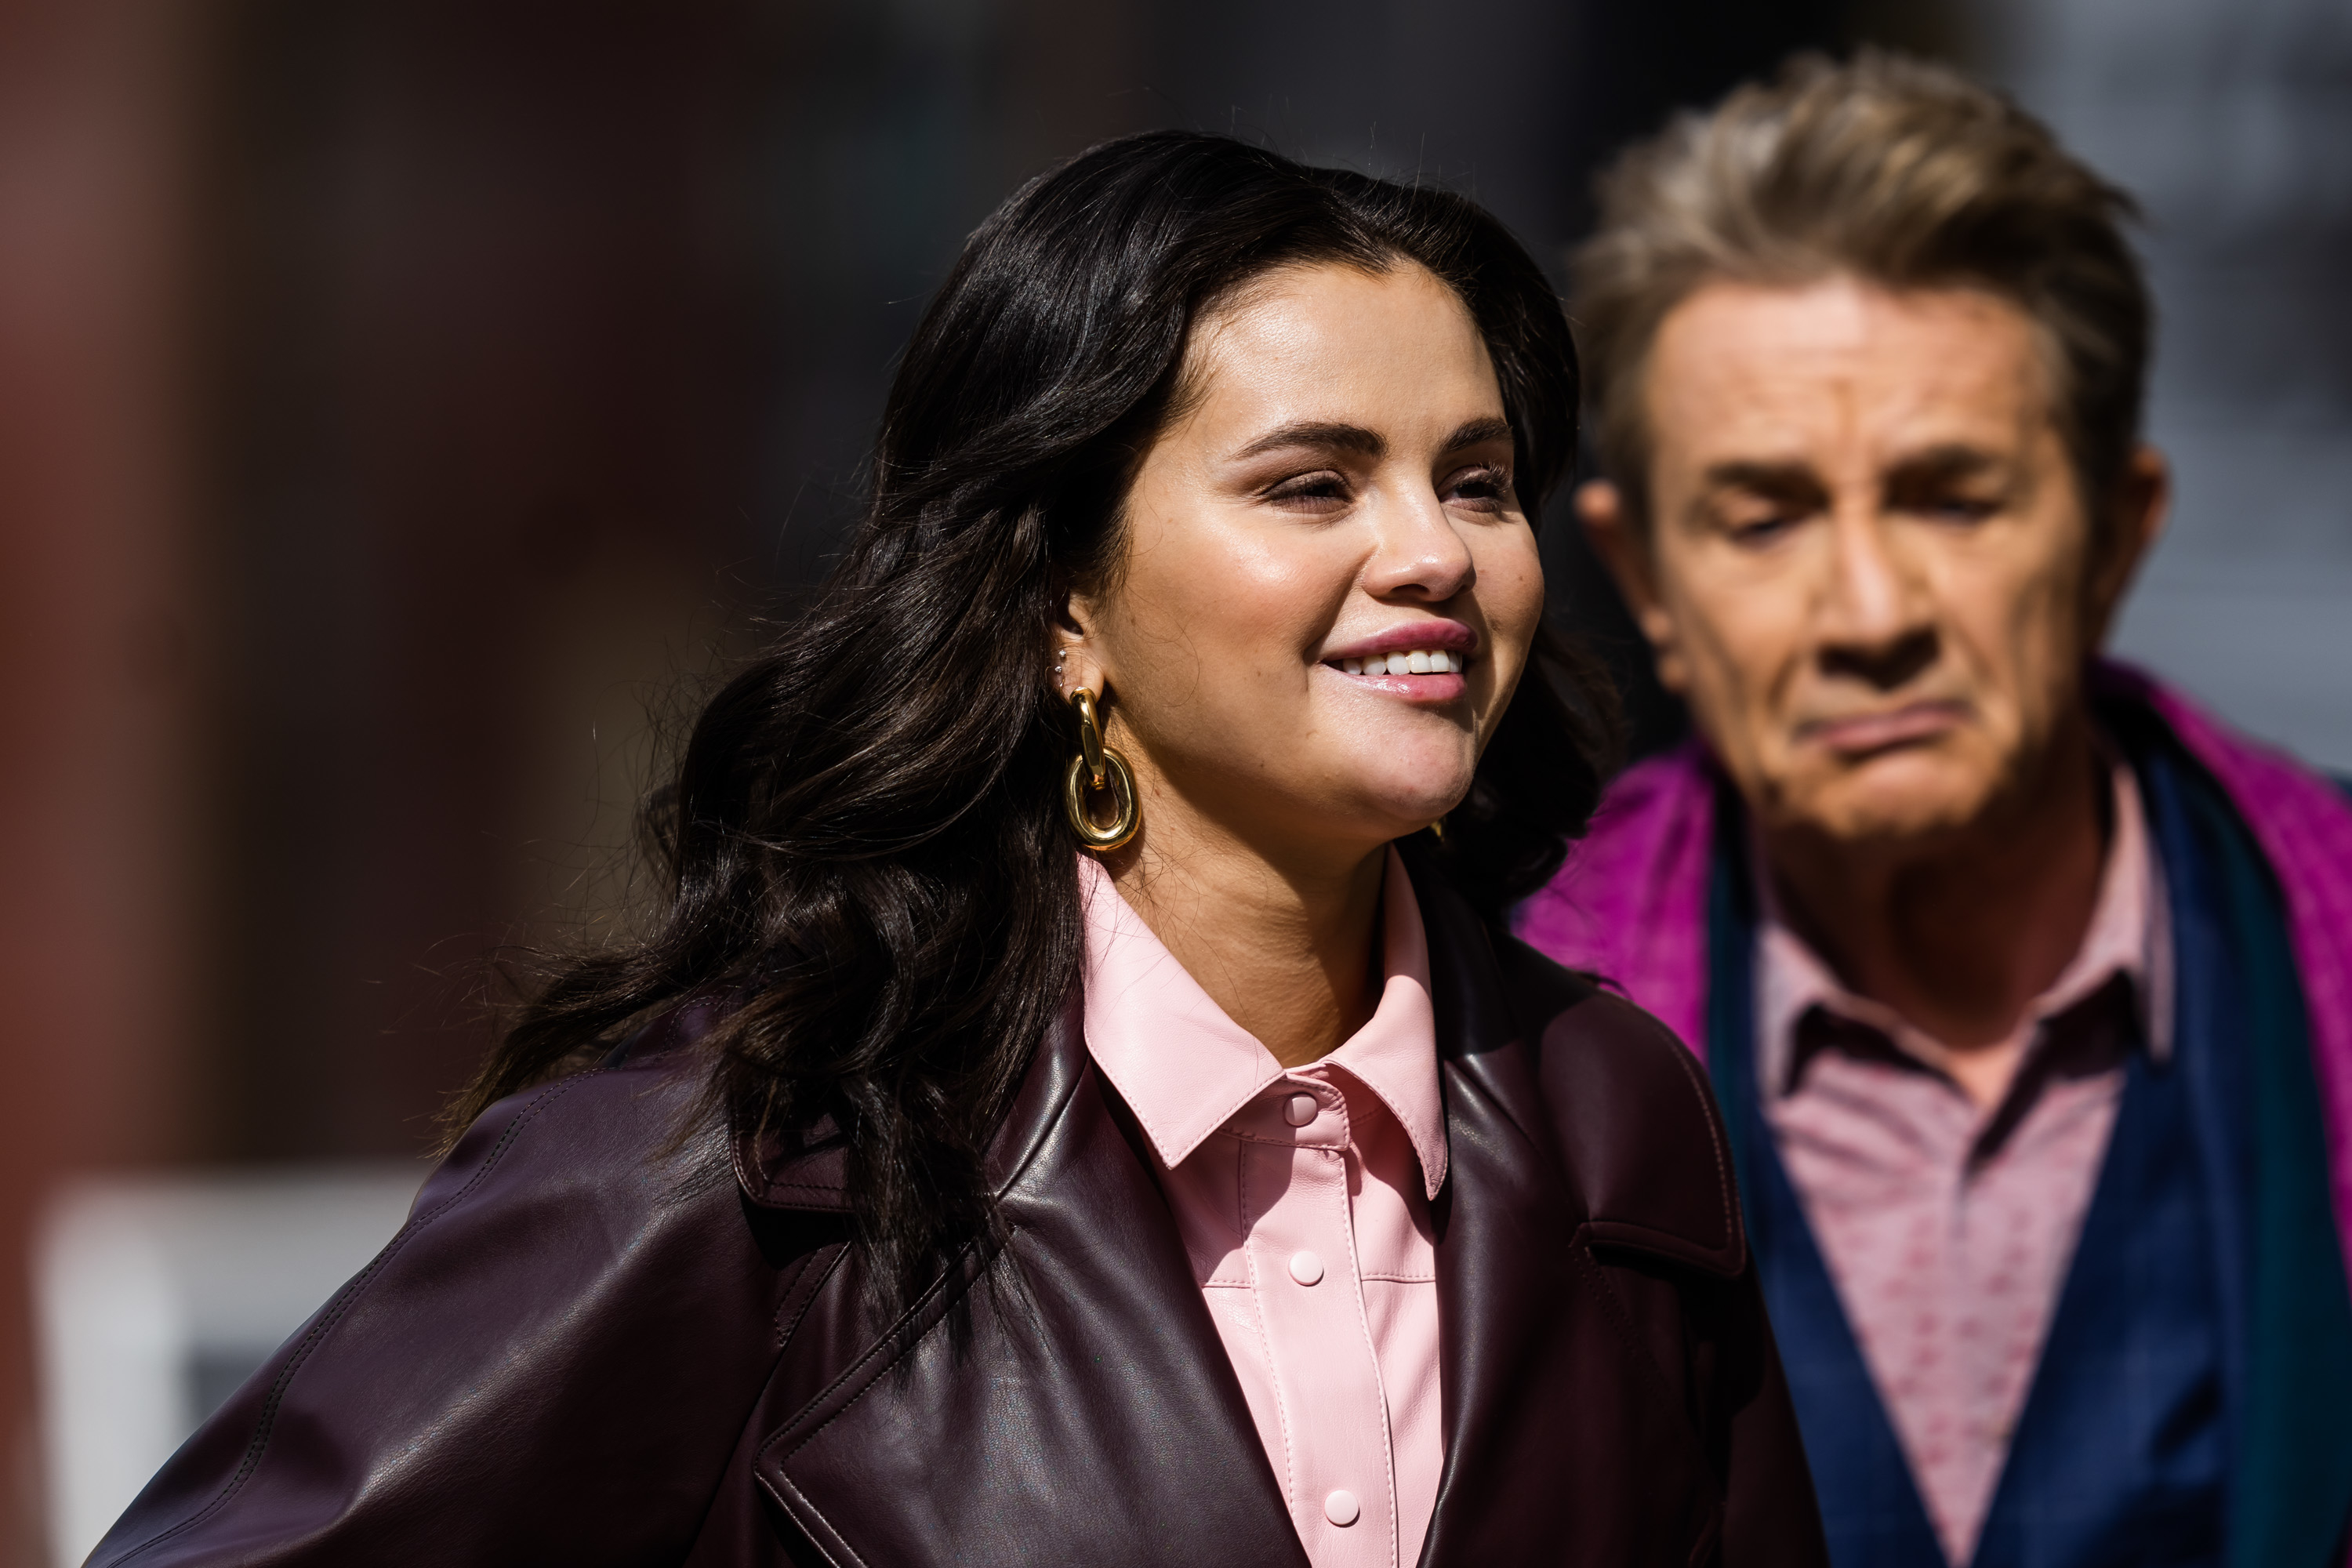 Close-up of Selena smiling with Only Murders in the Building costar Martin Short behind her